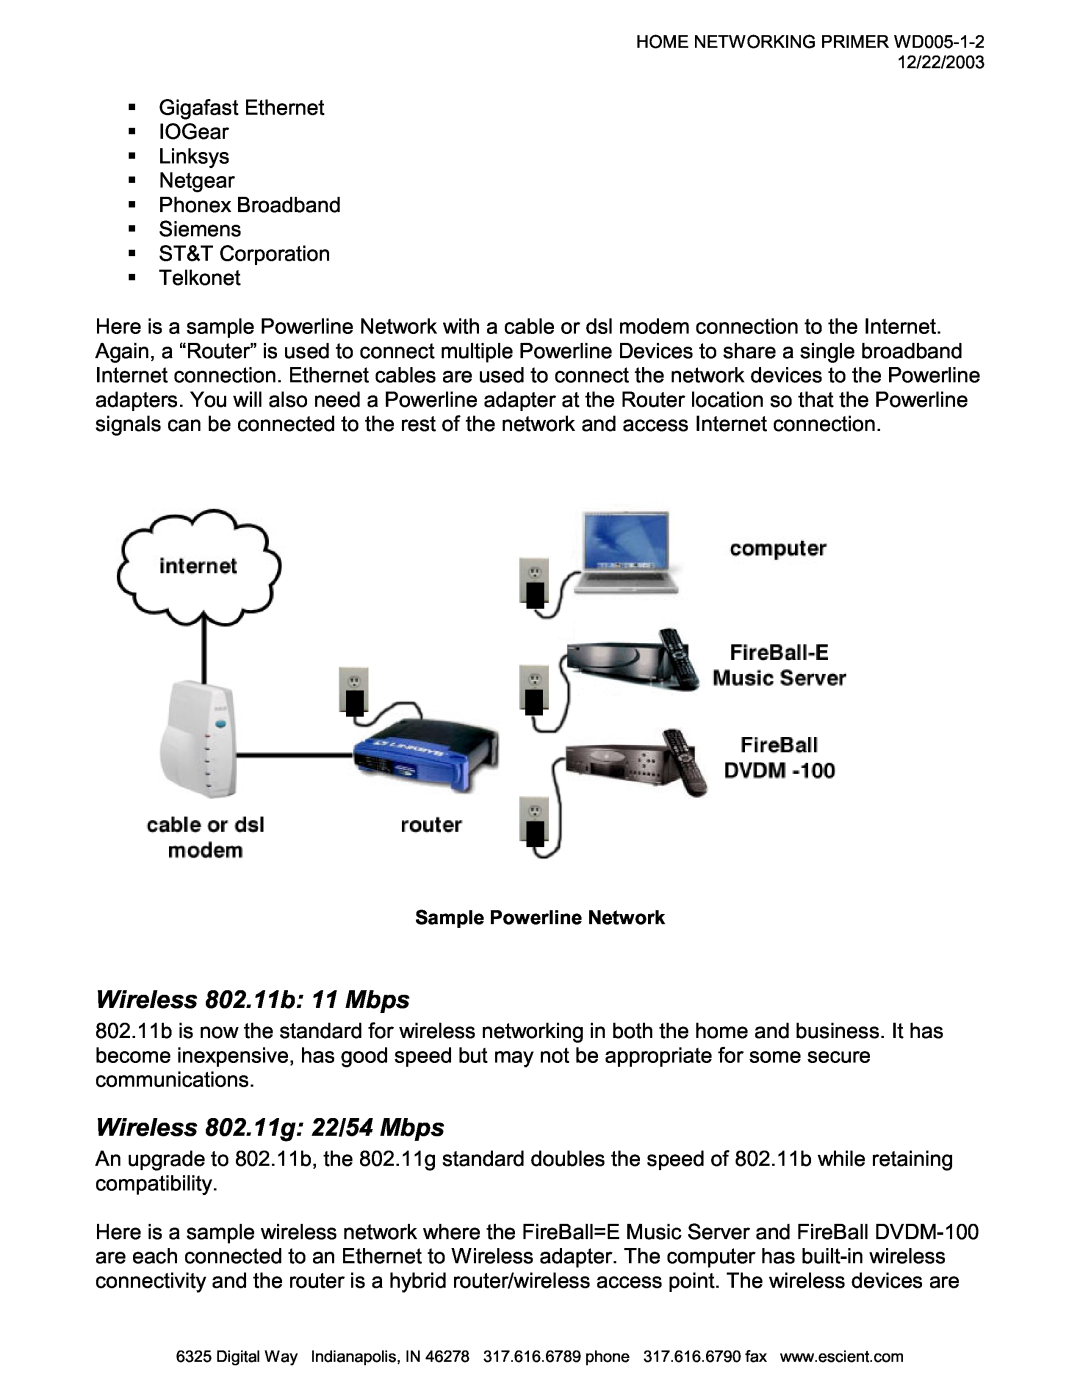 Escient MP-150 manual Wireless 802.11b: 11 Mbps, Wireless 802.11g: 22/54 Mbps 